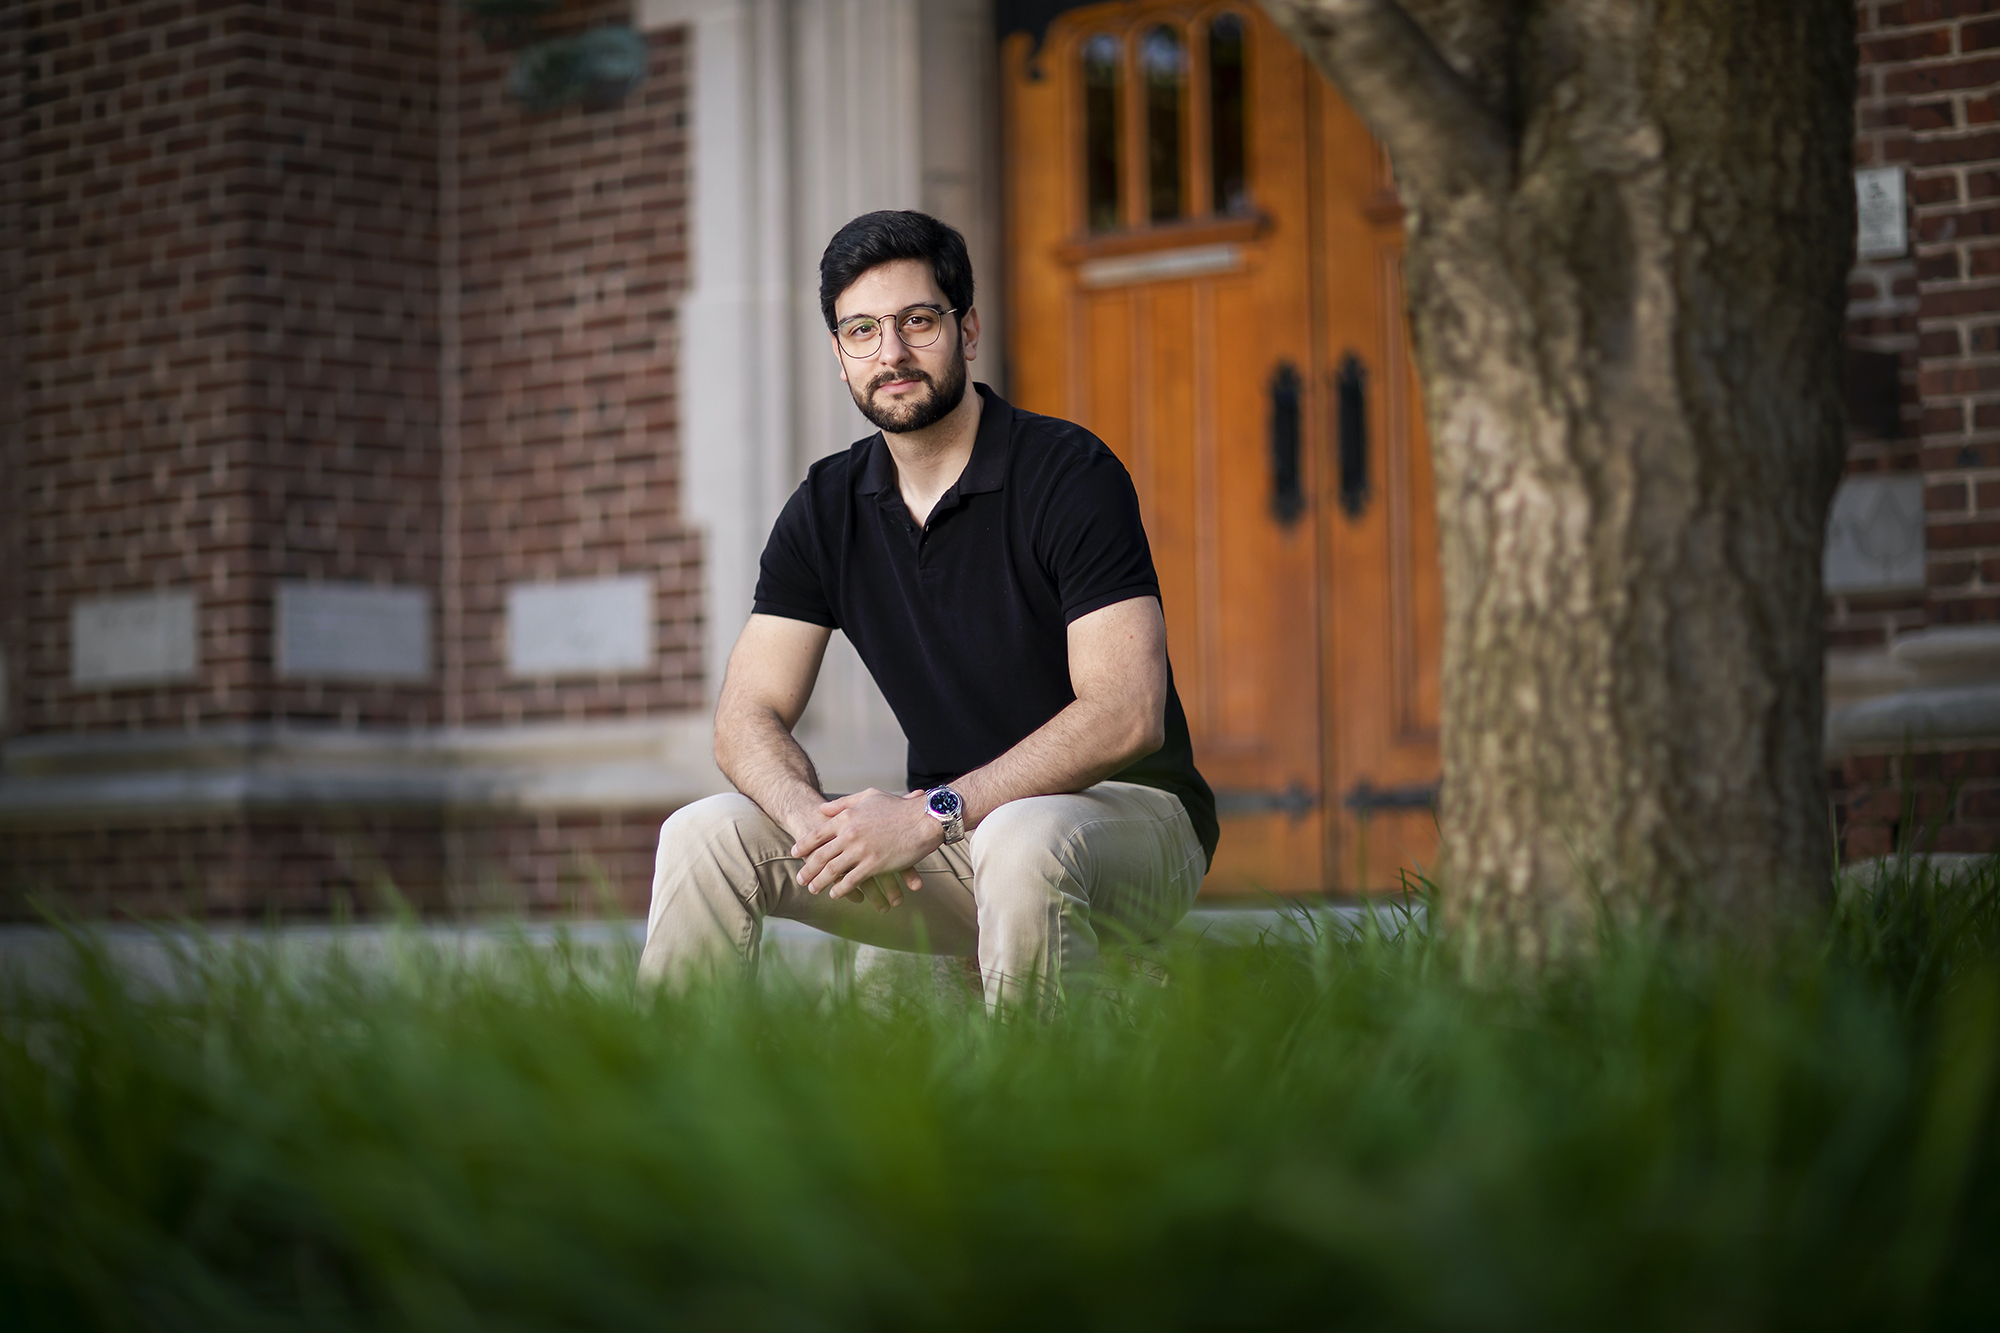 Ibrahim Bakri sits on a bench in front of wooden double doors and a red brick building